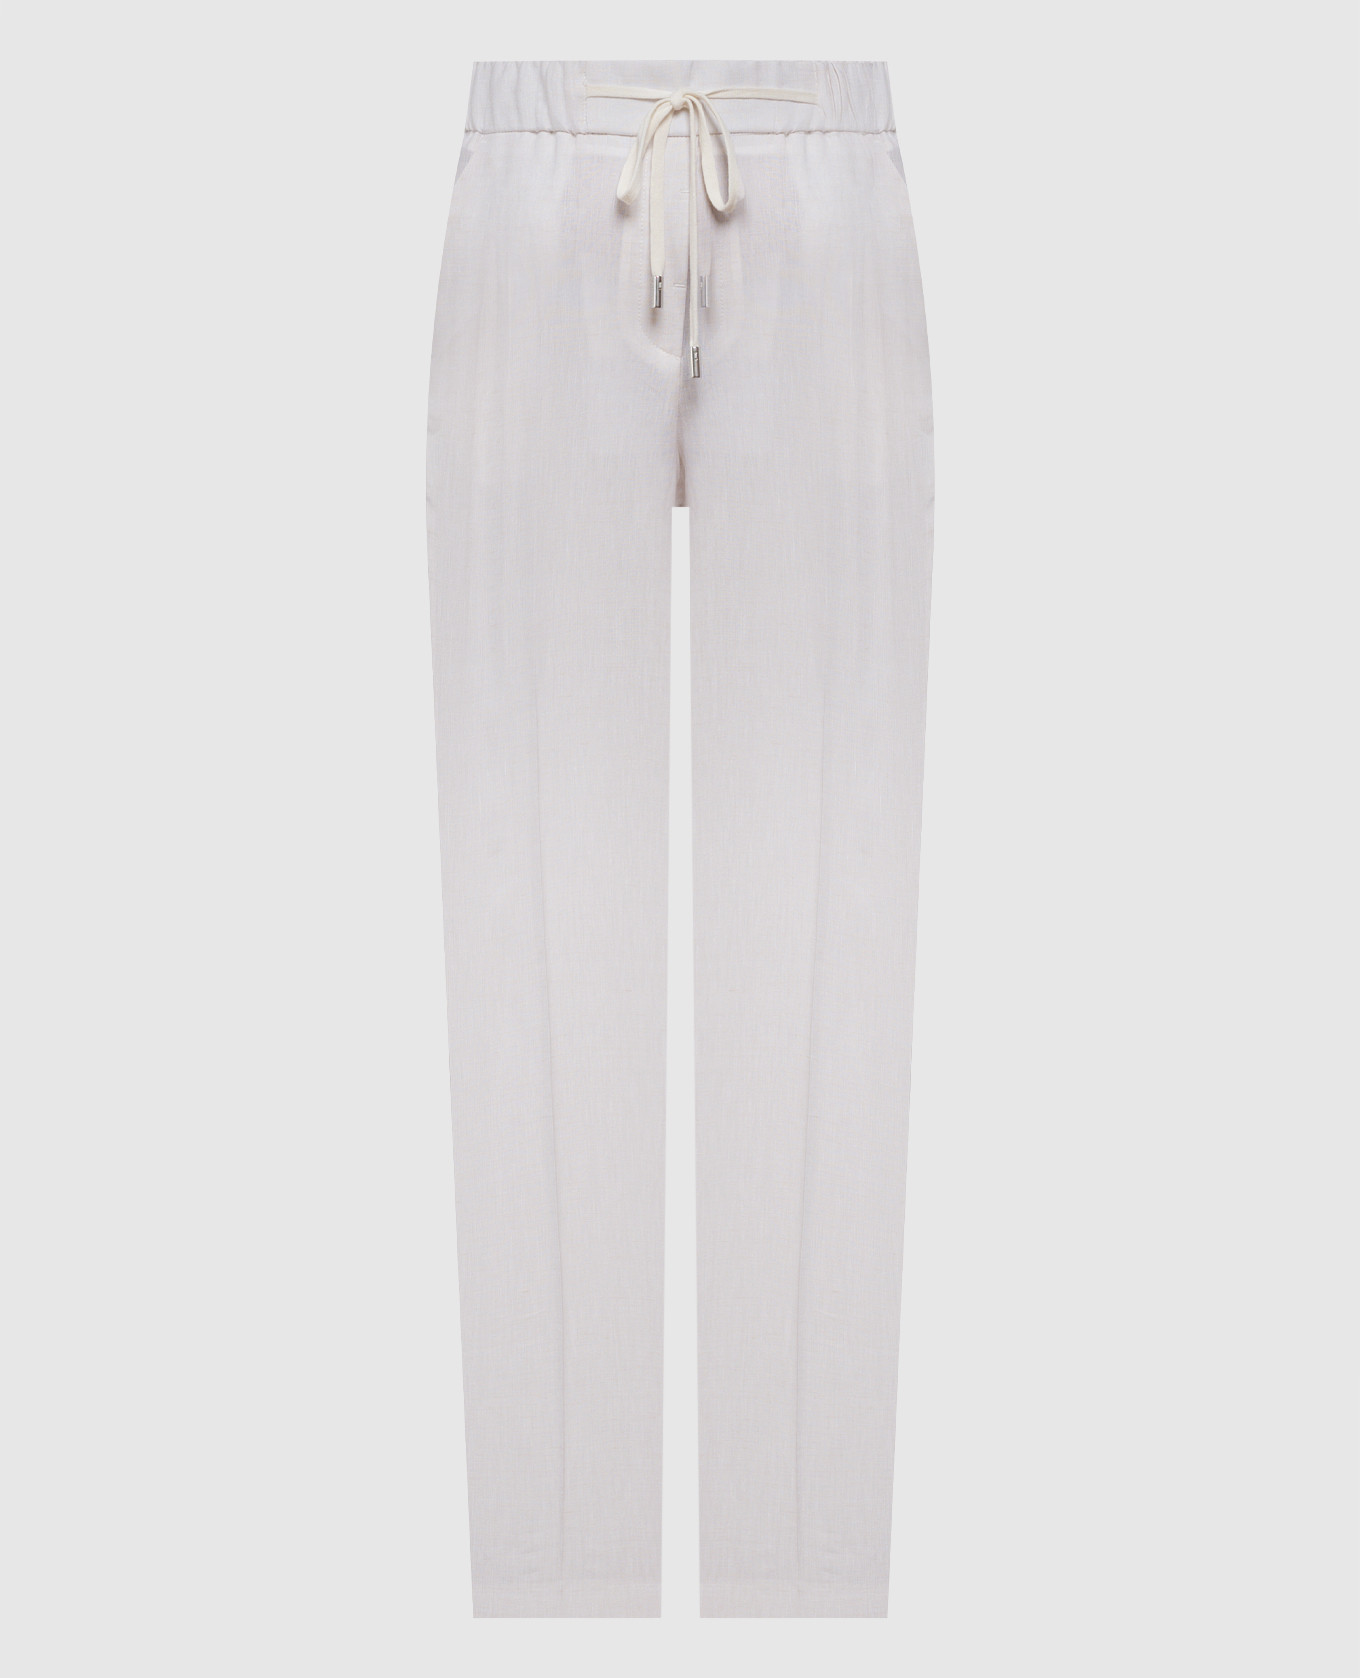 Beige straight pants made of linen